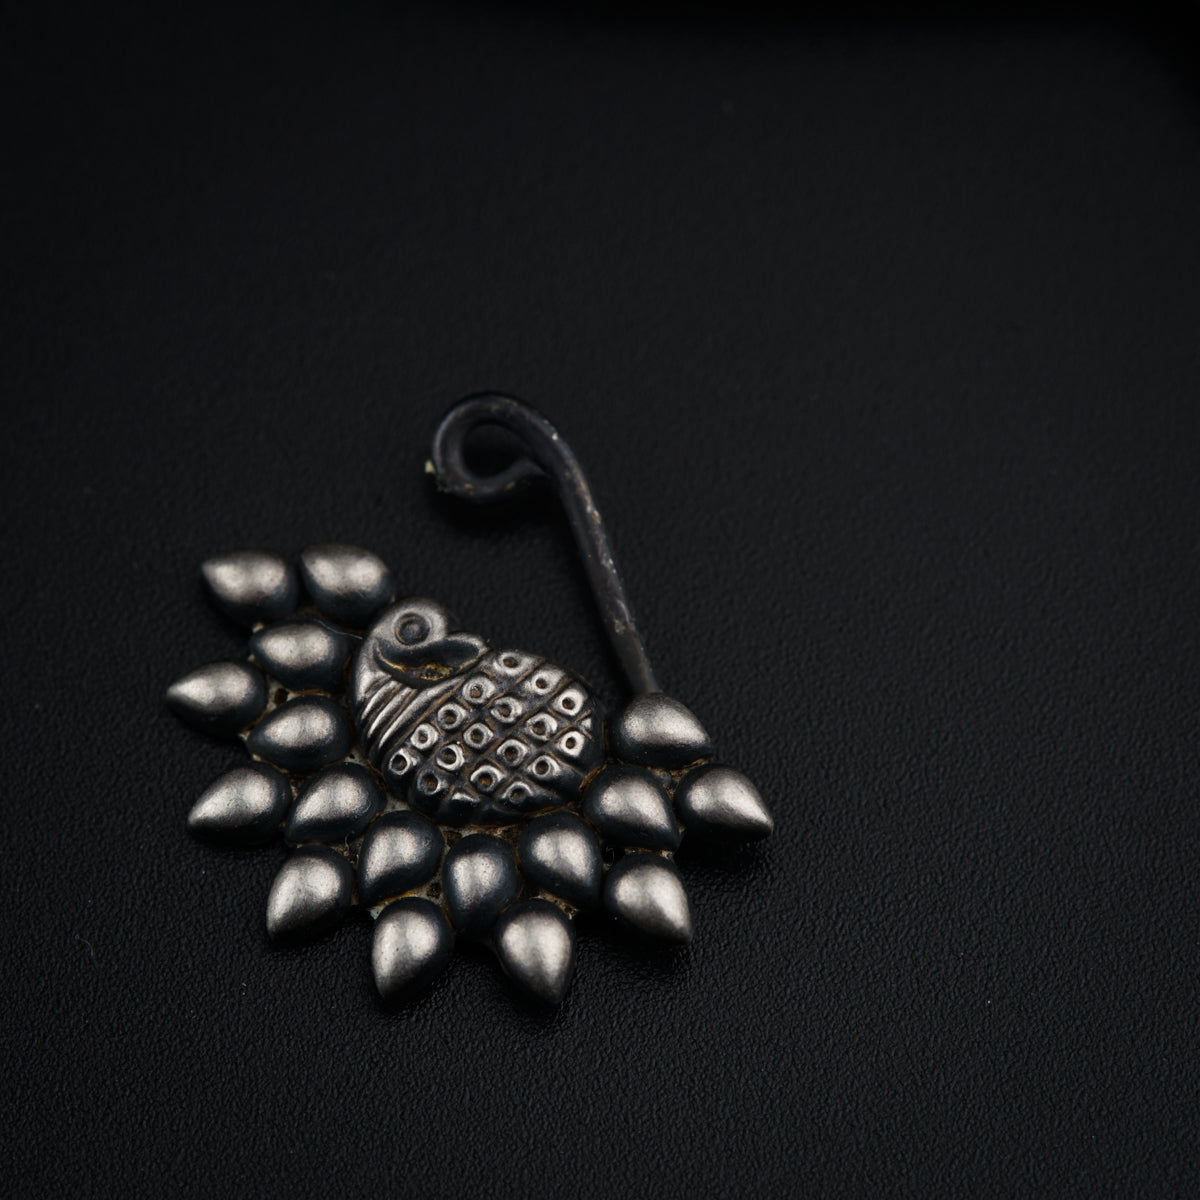 a brooch with a bird on it on a black surface